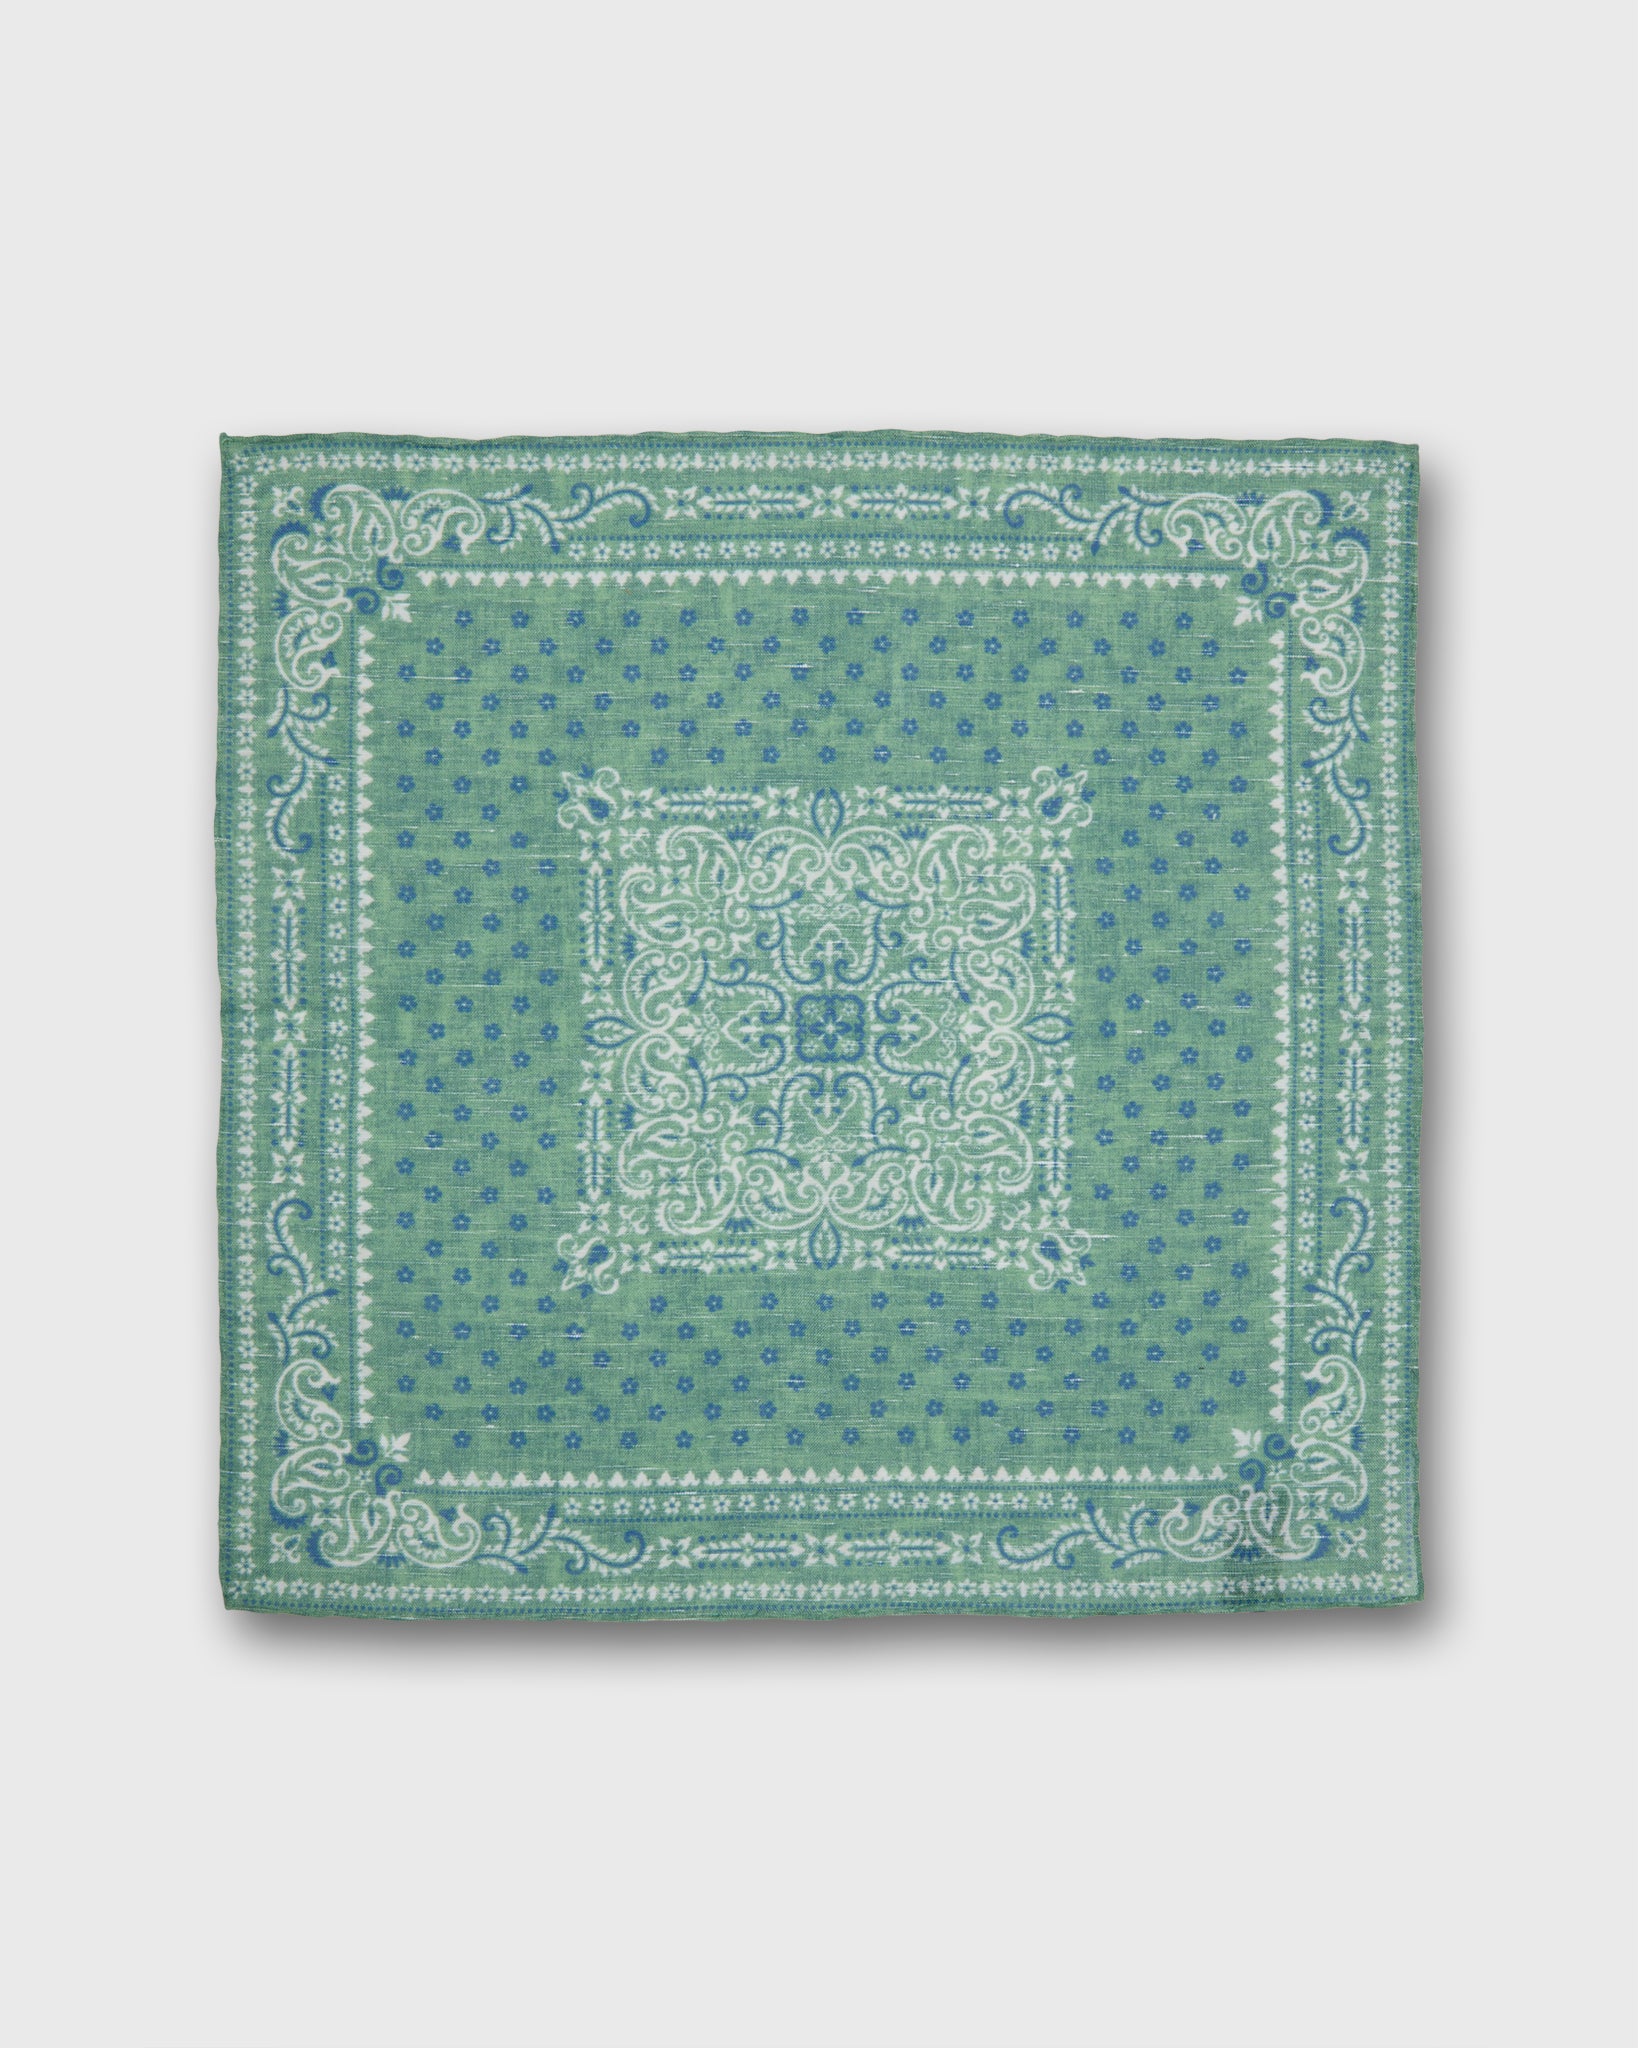 Linen/Cotton Print Pocket Square in Mint/Navy Flower Paisley